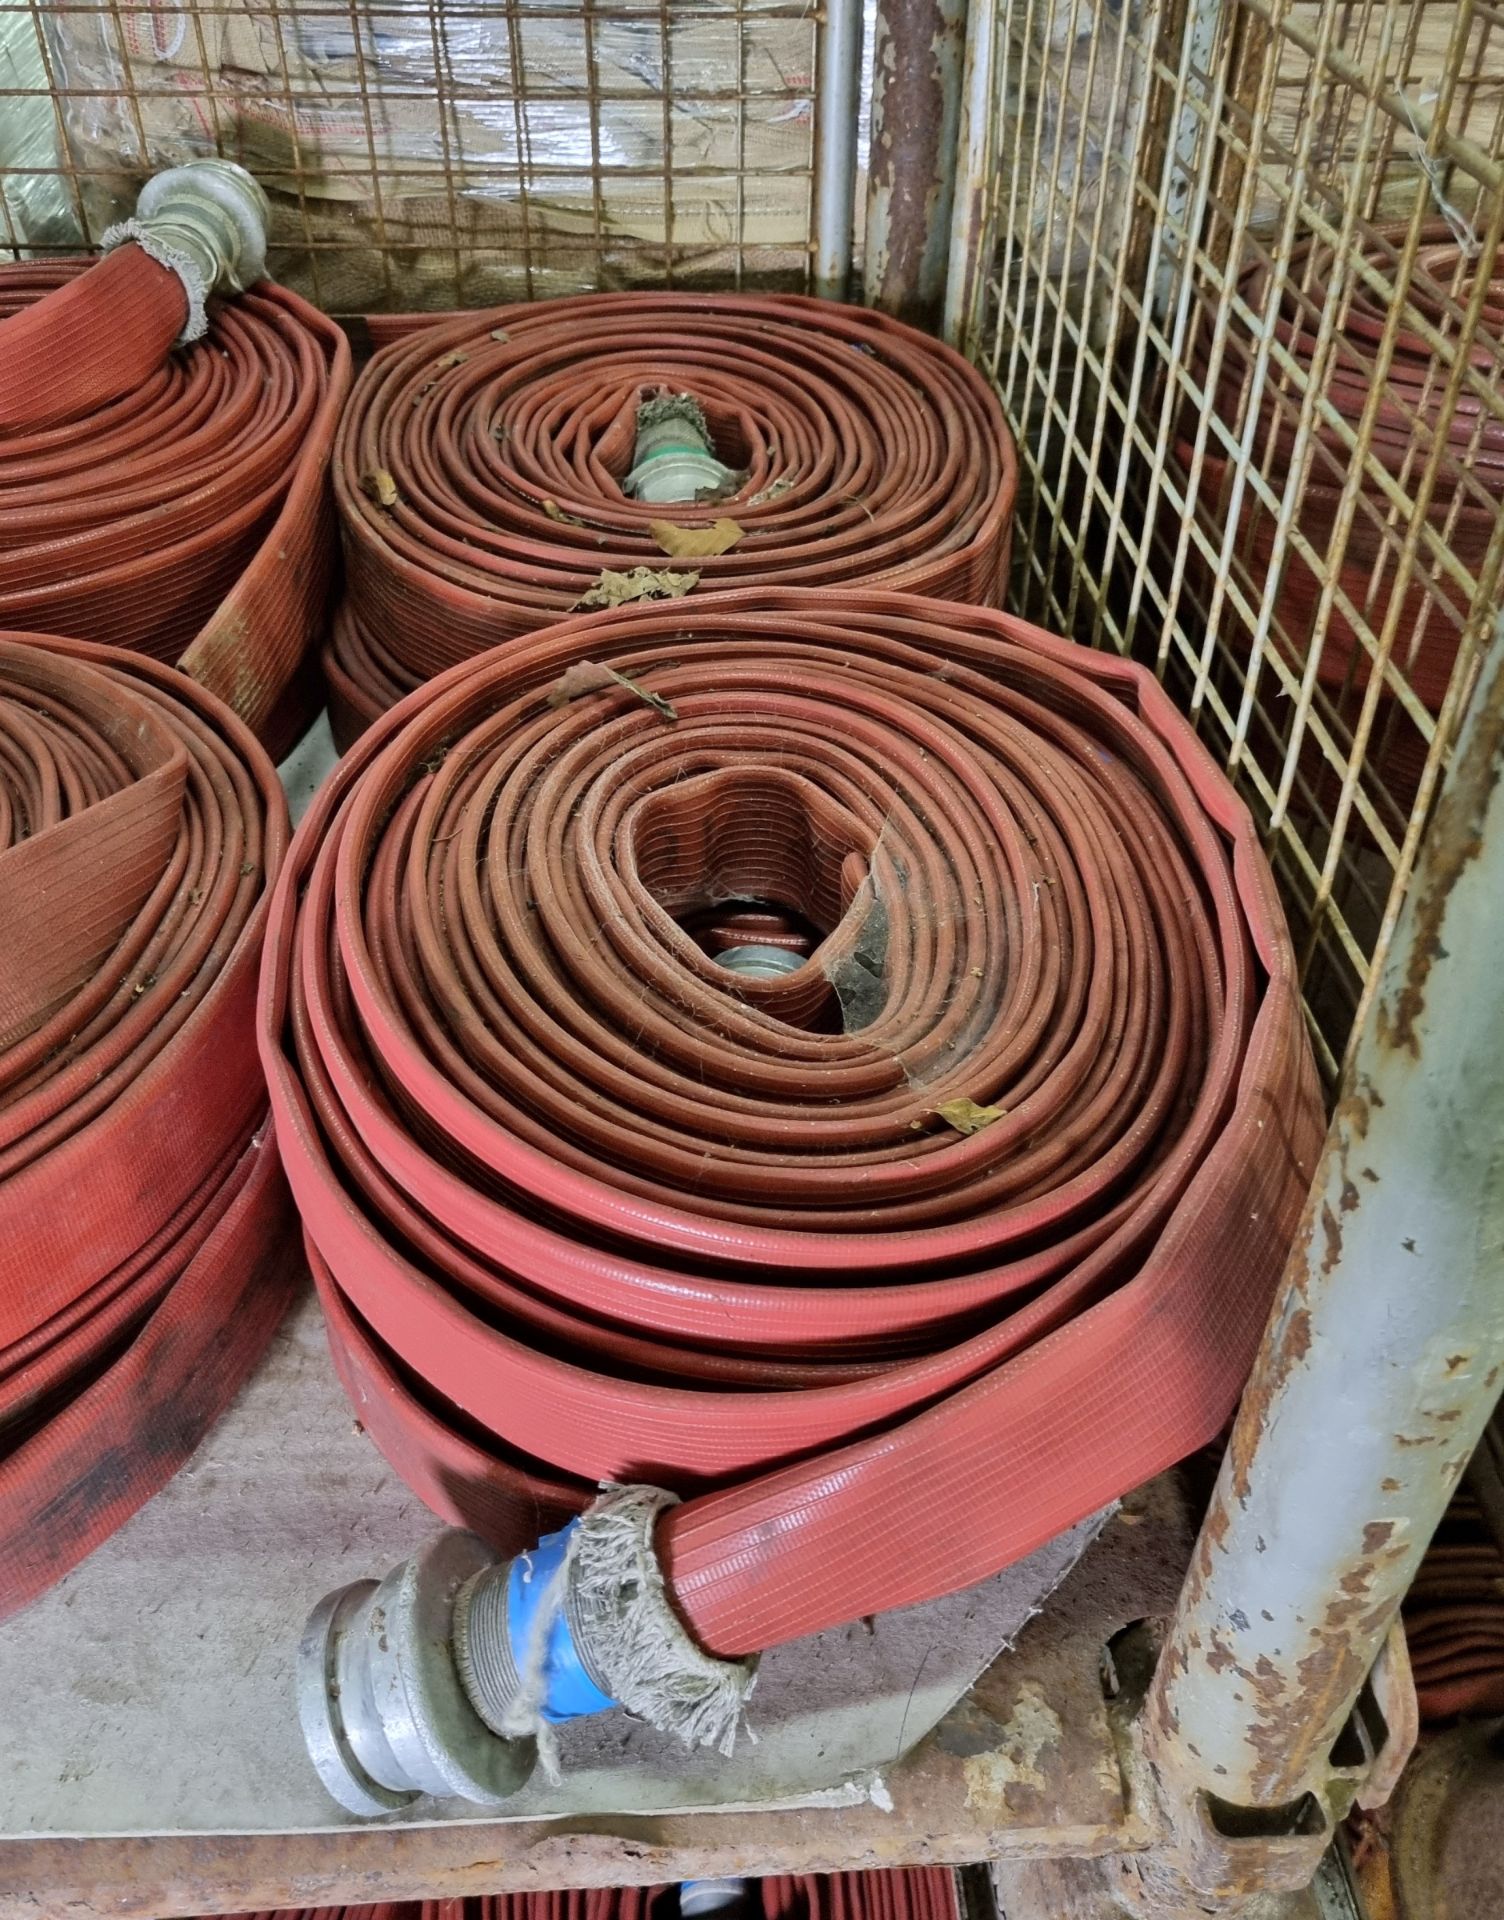 12x Angus Duraline 45mm lay flat hoses with single coupling - approx 23m in length - Image 3 of 4